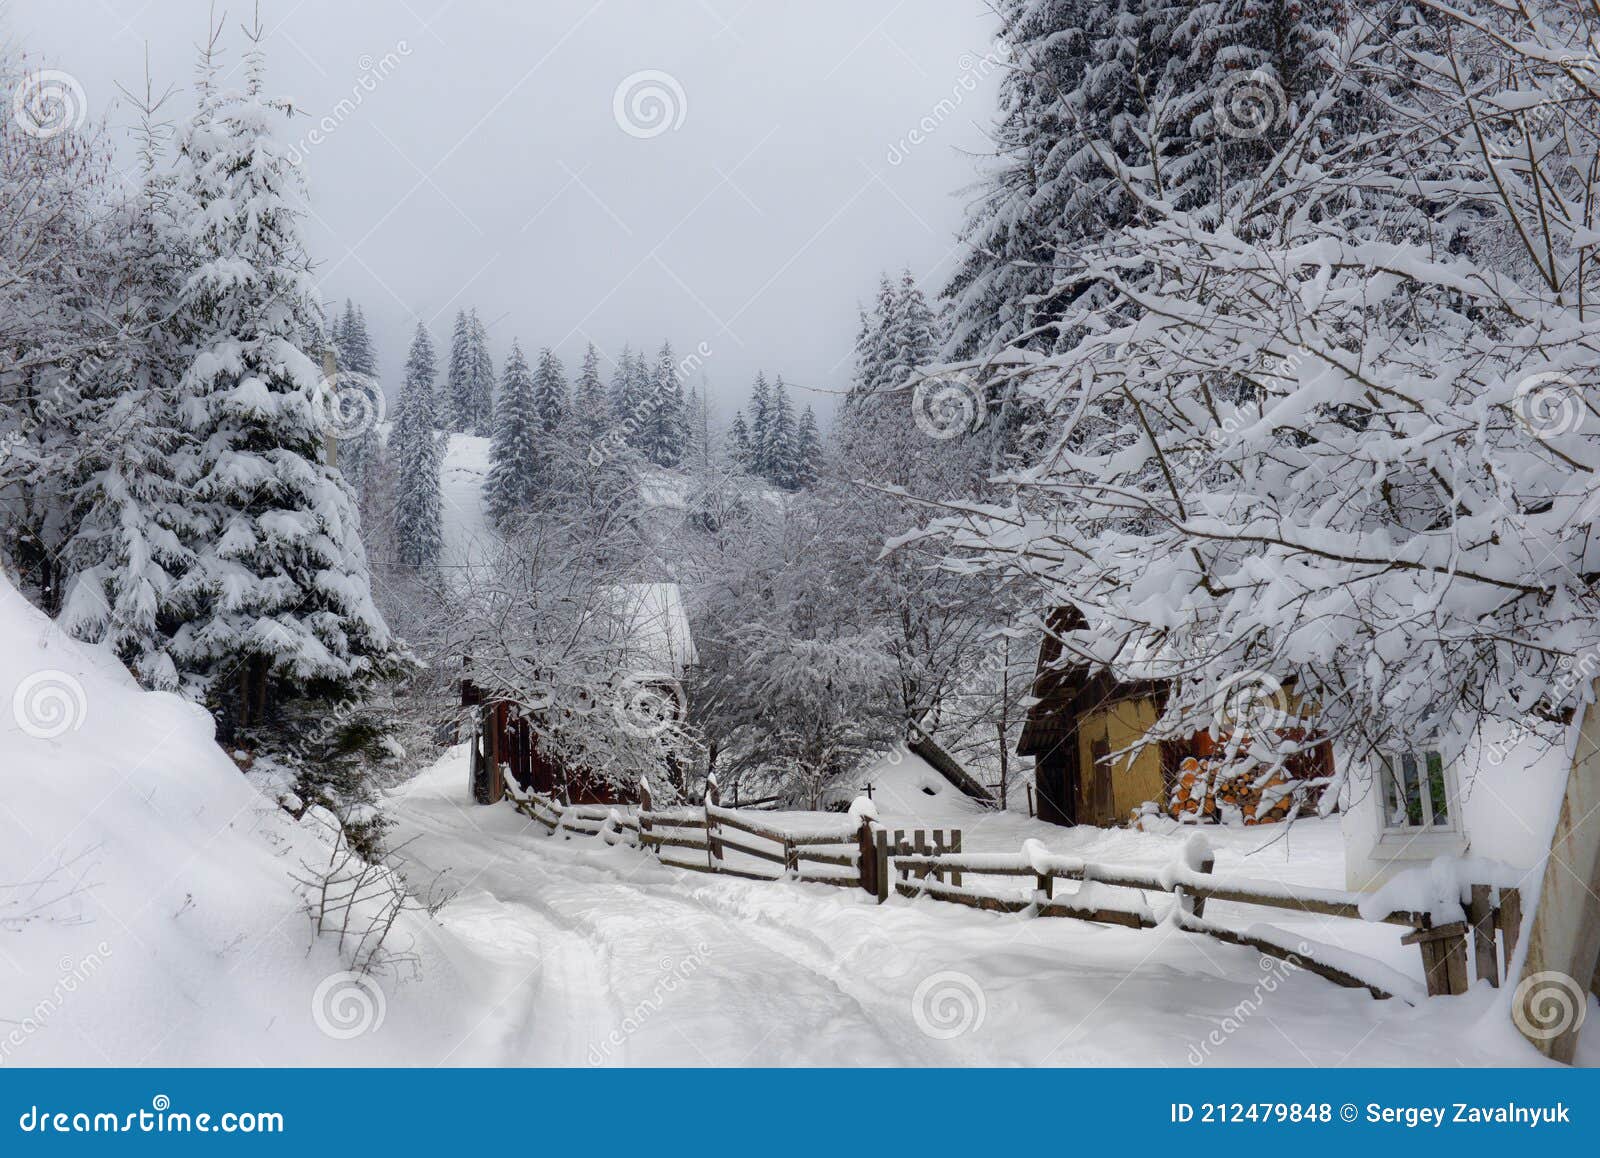 typical landscape of the ukrainian carpathians with private estates in winter